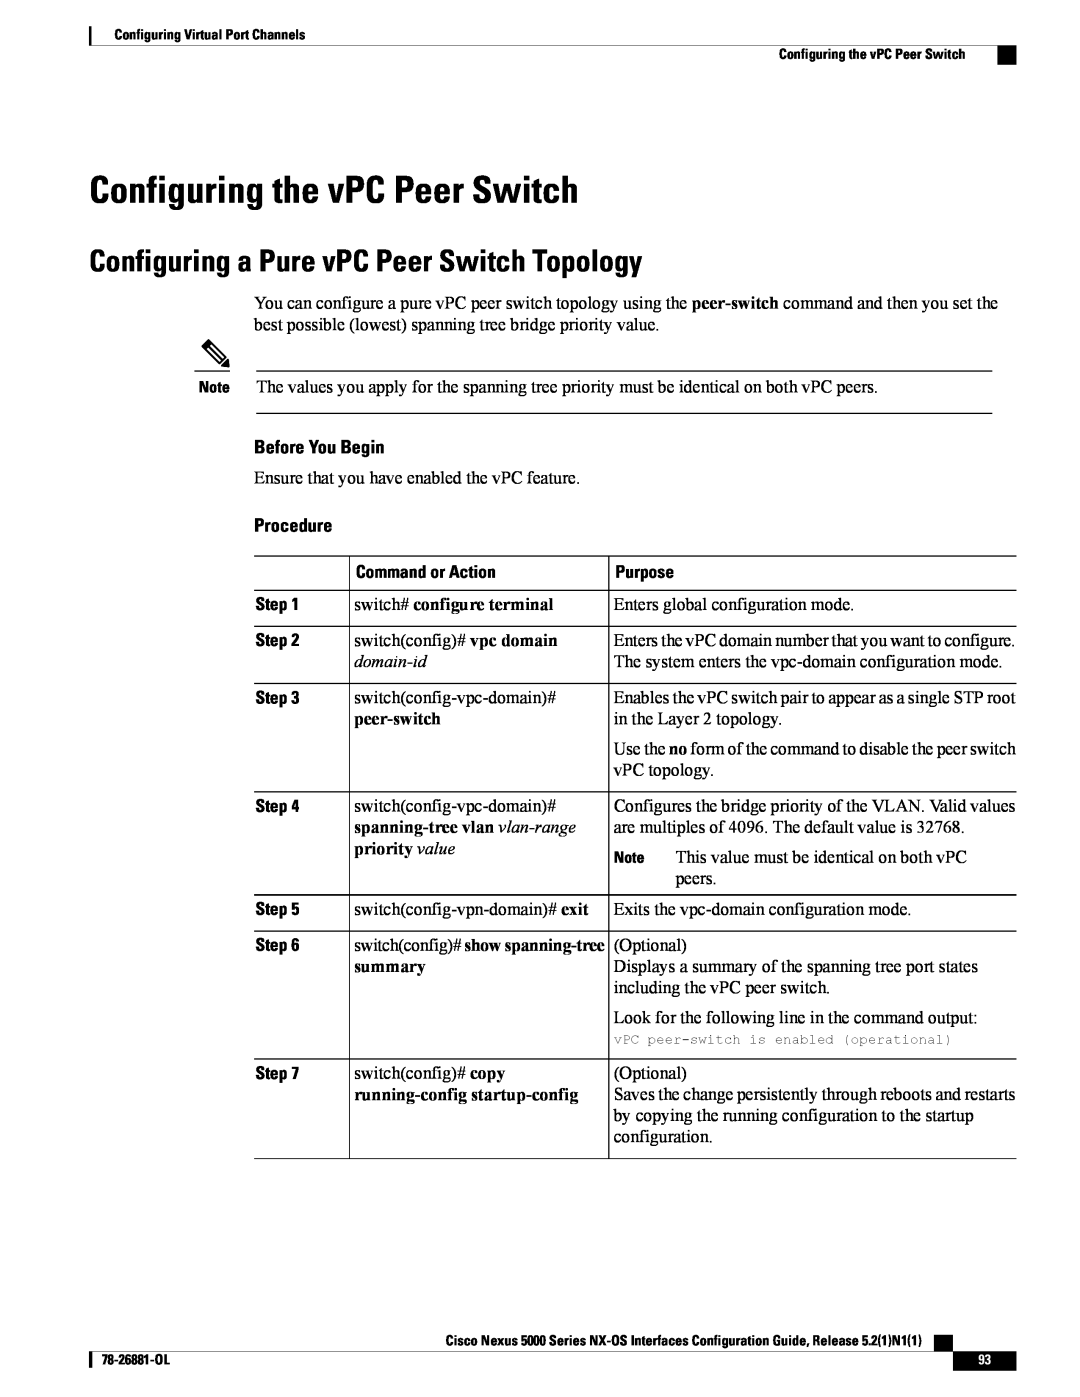 Cisco Systems N5KC5596TFA manual Configuring the vPC Peer Switch, Configuring a Pure vPC Peer Switch Topology, peer-switch 